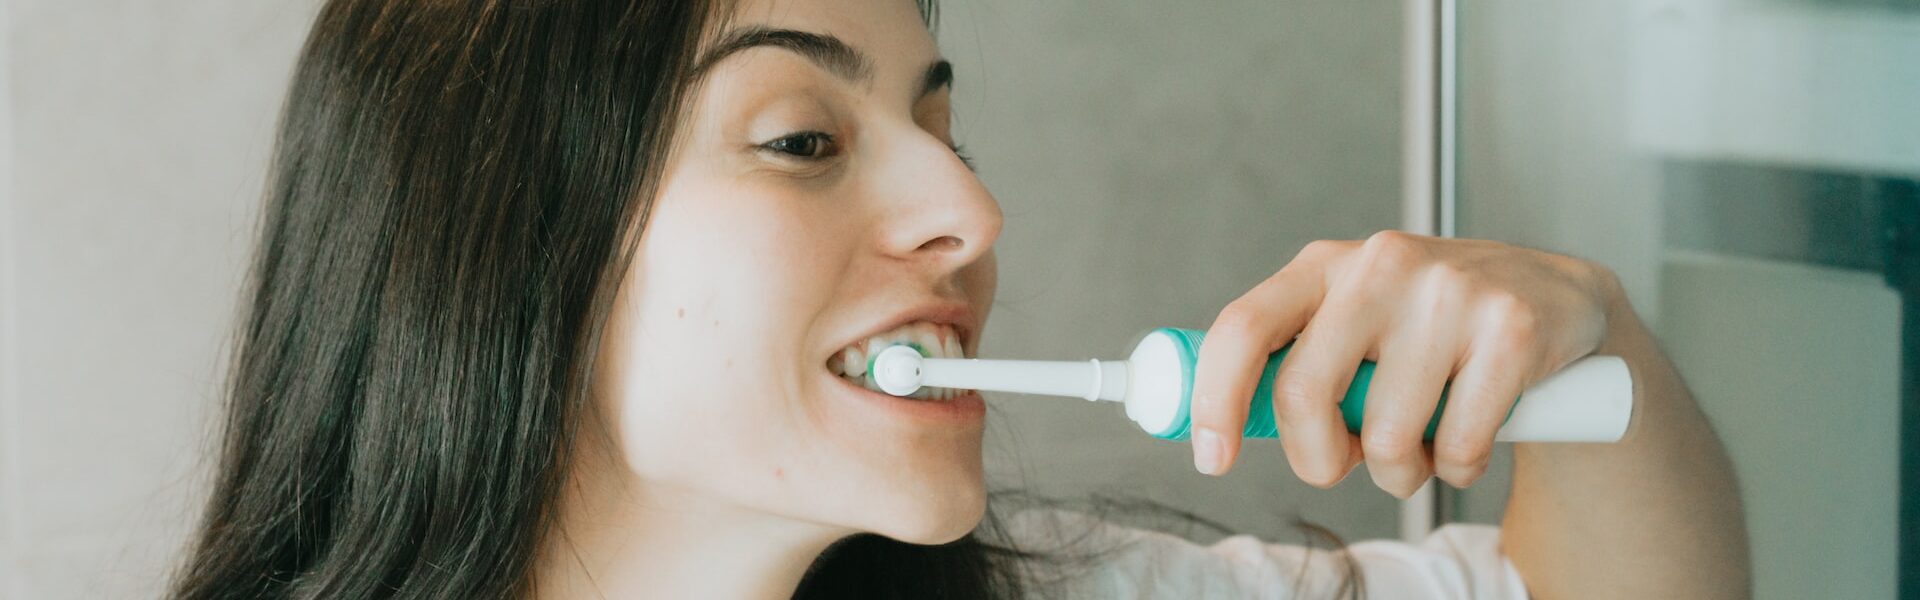 Tips for Safe and Healthy Dental Care